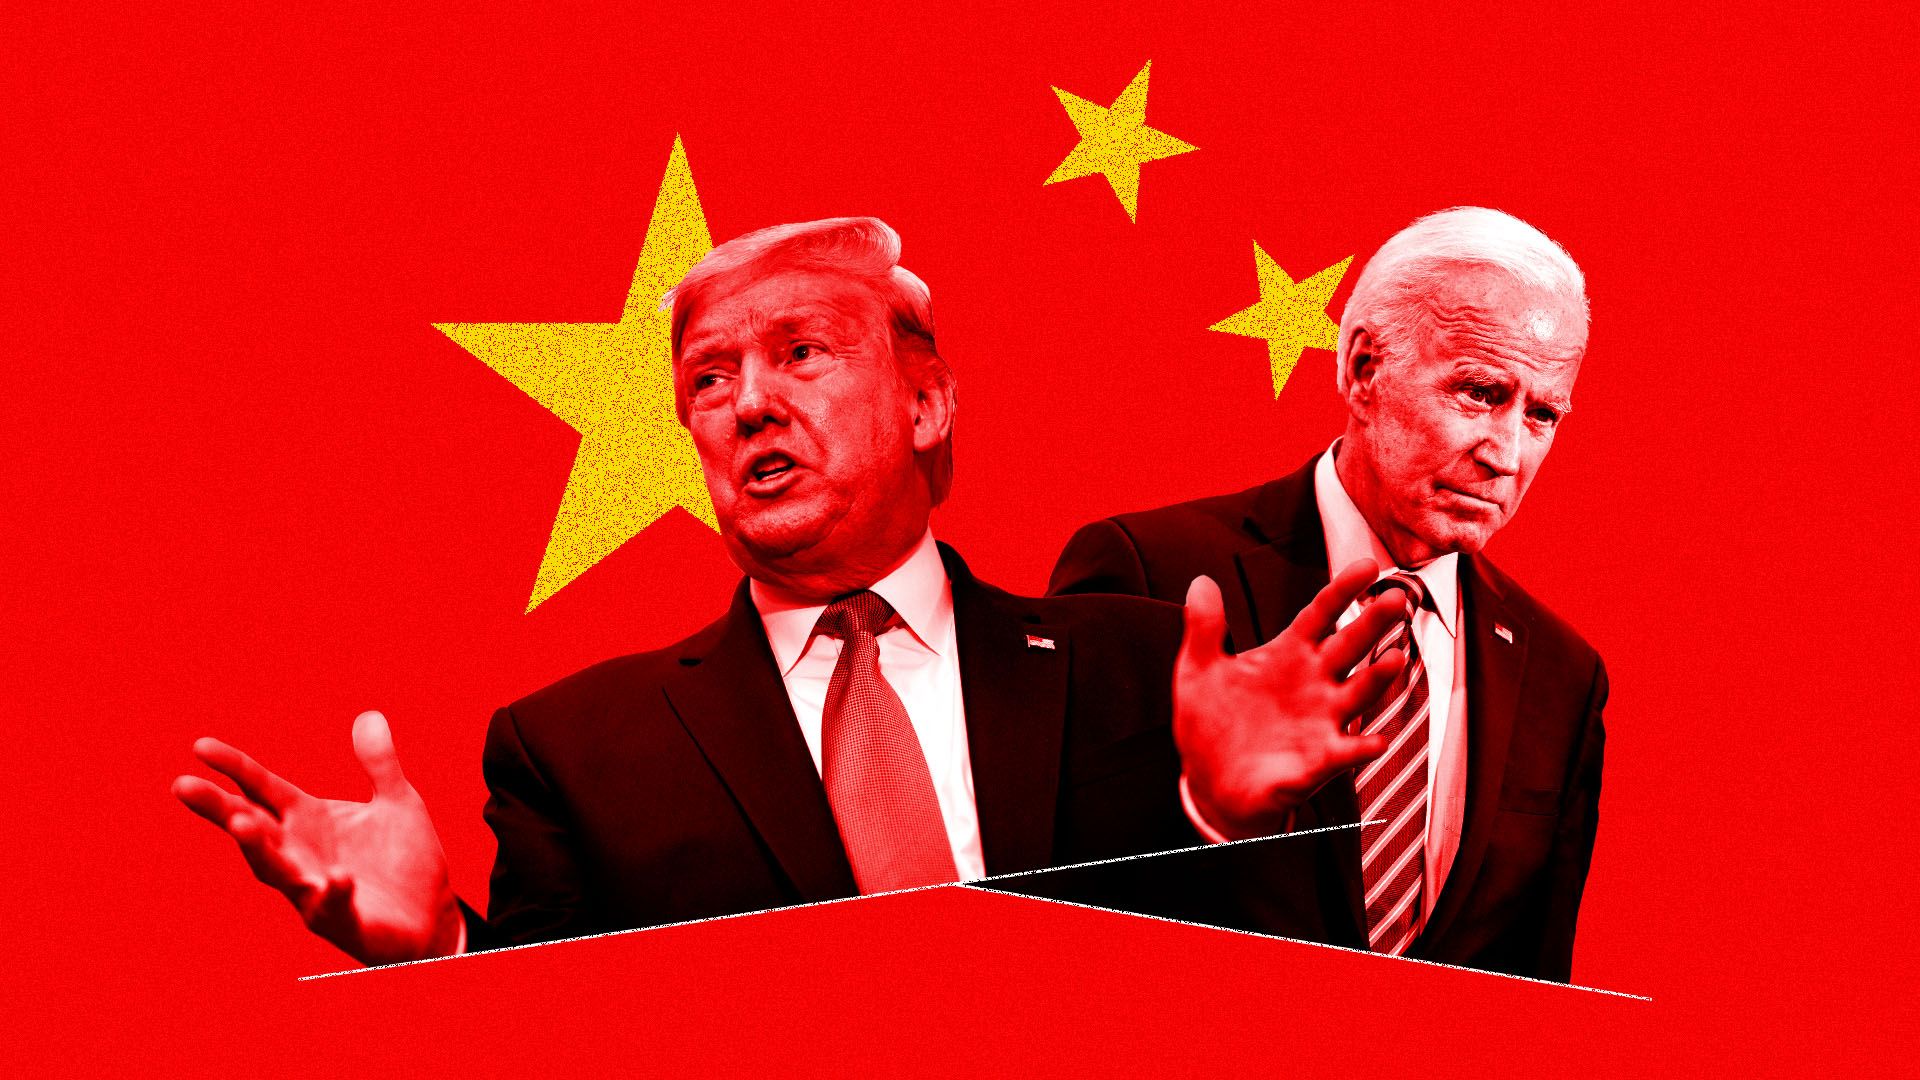 Illustrated collage of President Trump and Joe Biden against the Chinese flag.